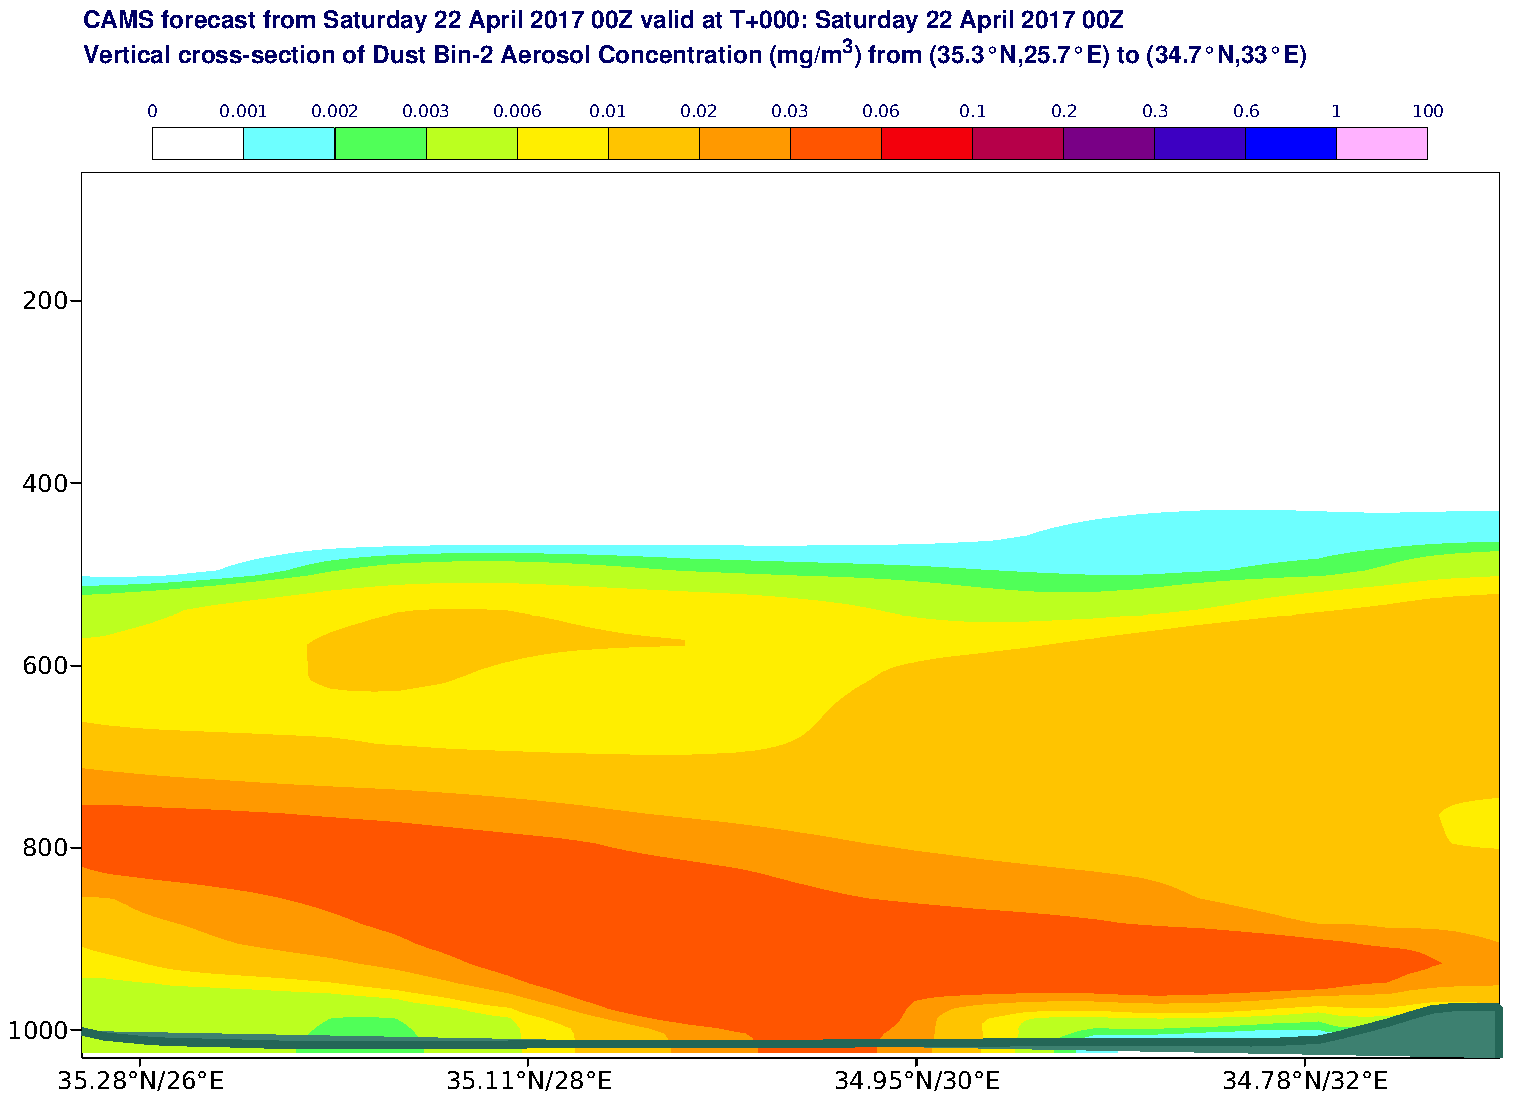 Vertical cross-section of Dust Bin-2 Aerosol Concentration (mg/m3) valid at T0 - 2017-04-22 00:00